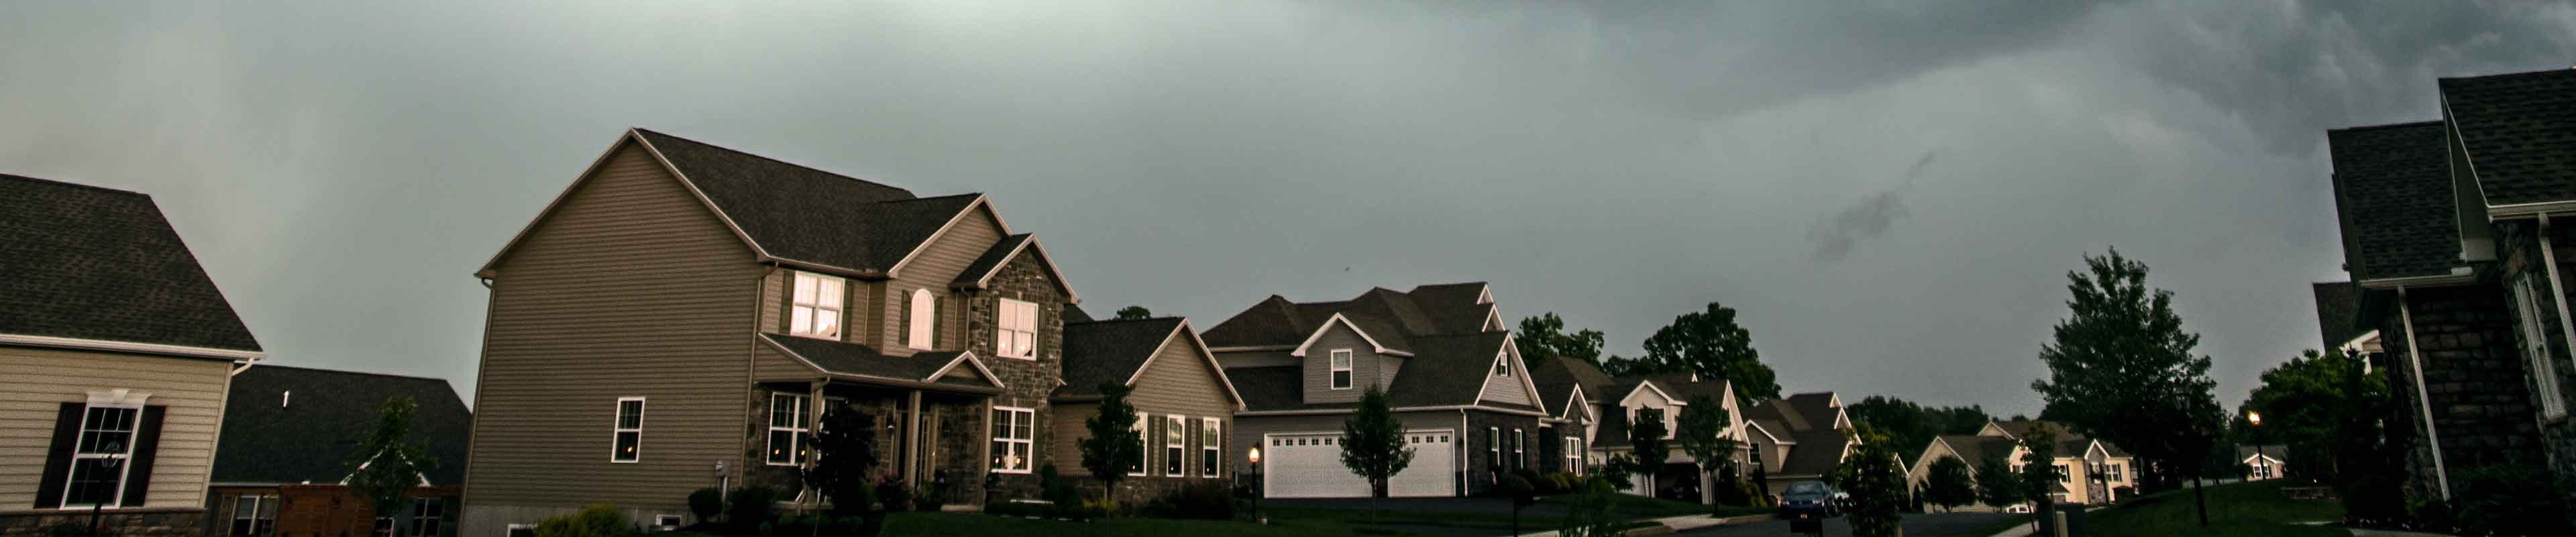 A storm with potential hail, winds and lightning looms over houses.